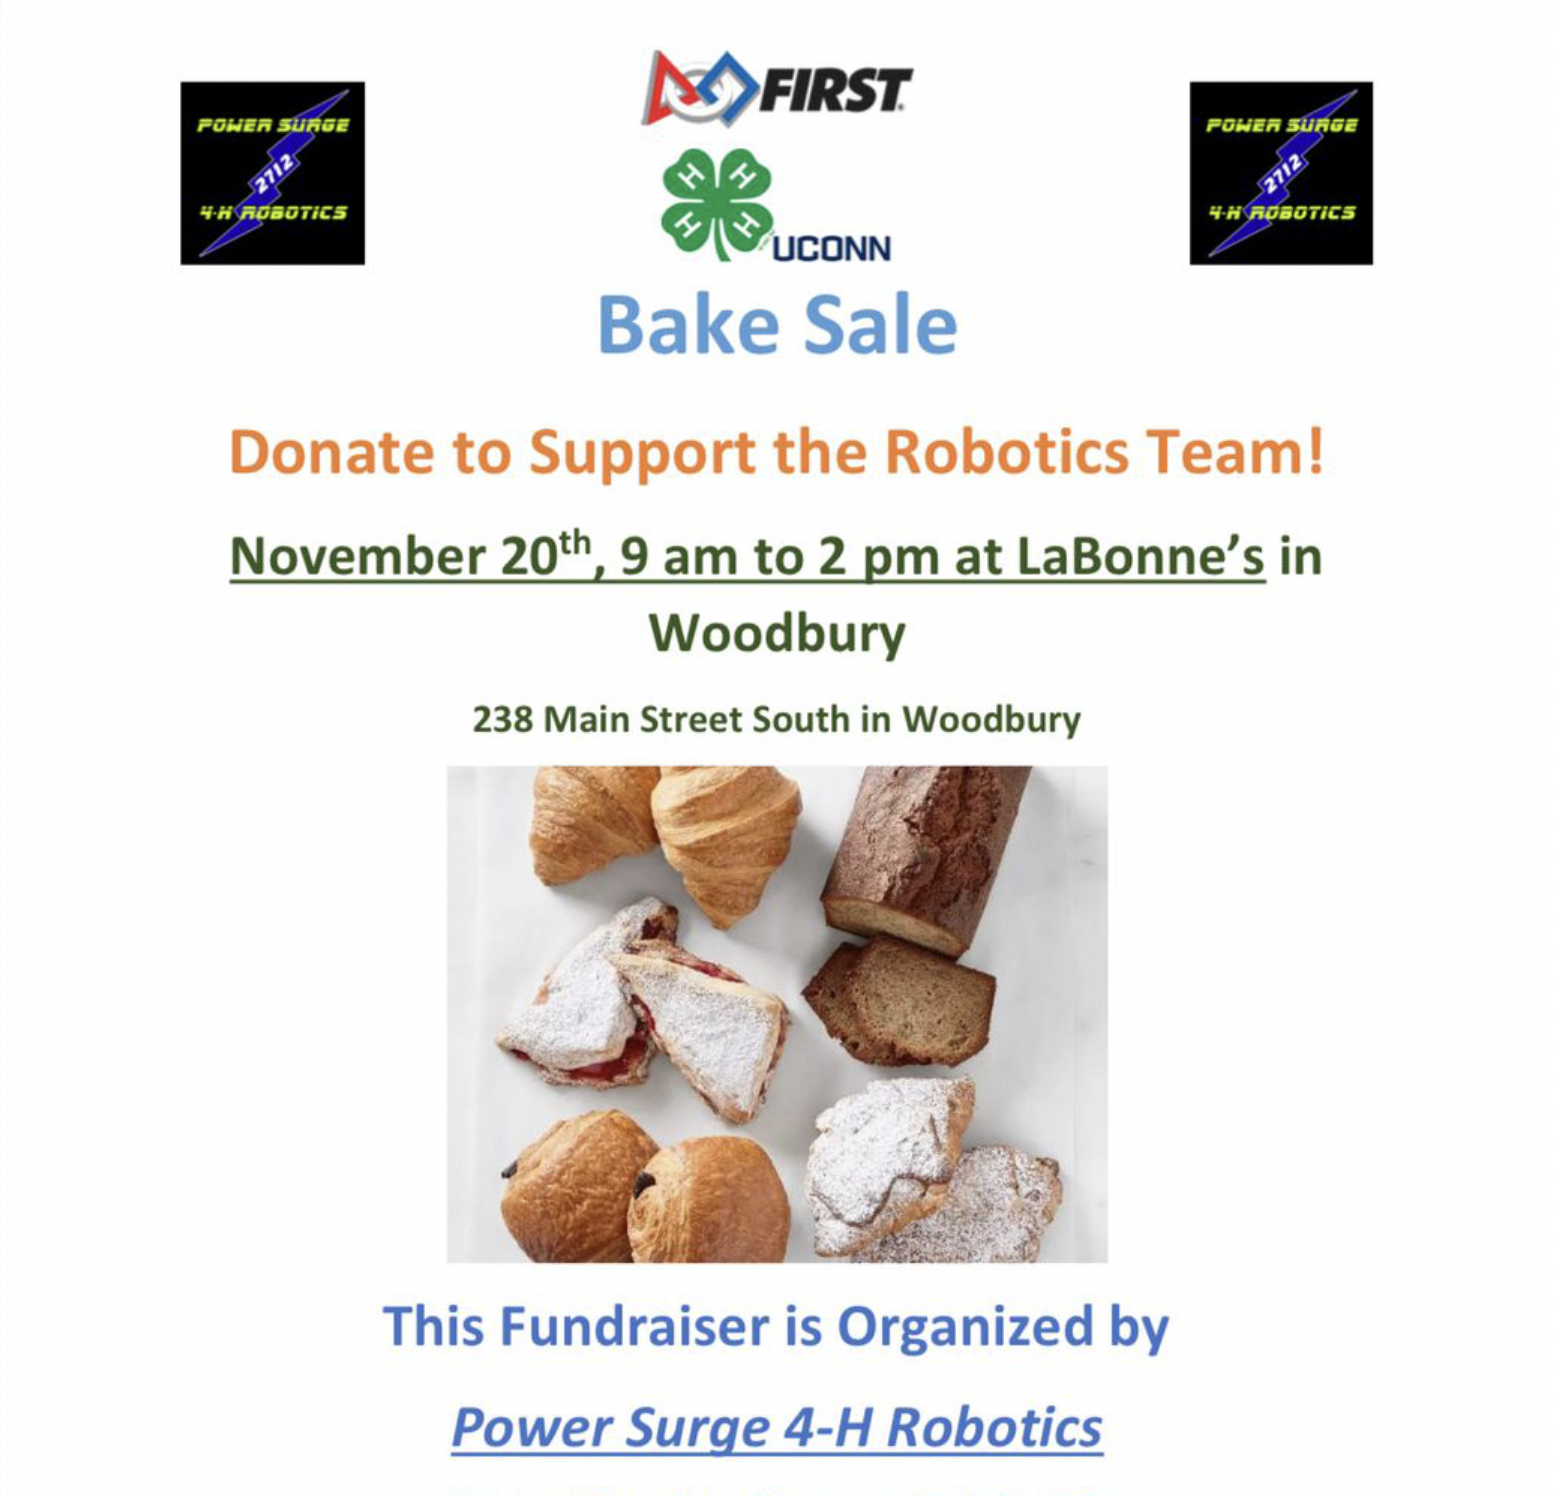 Bake Sale November 20, 2022 at LaBonnes in Woodbury, 9AM to 2PM, Donate to support the robotics team!